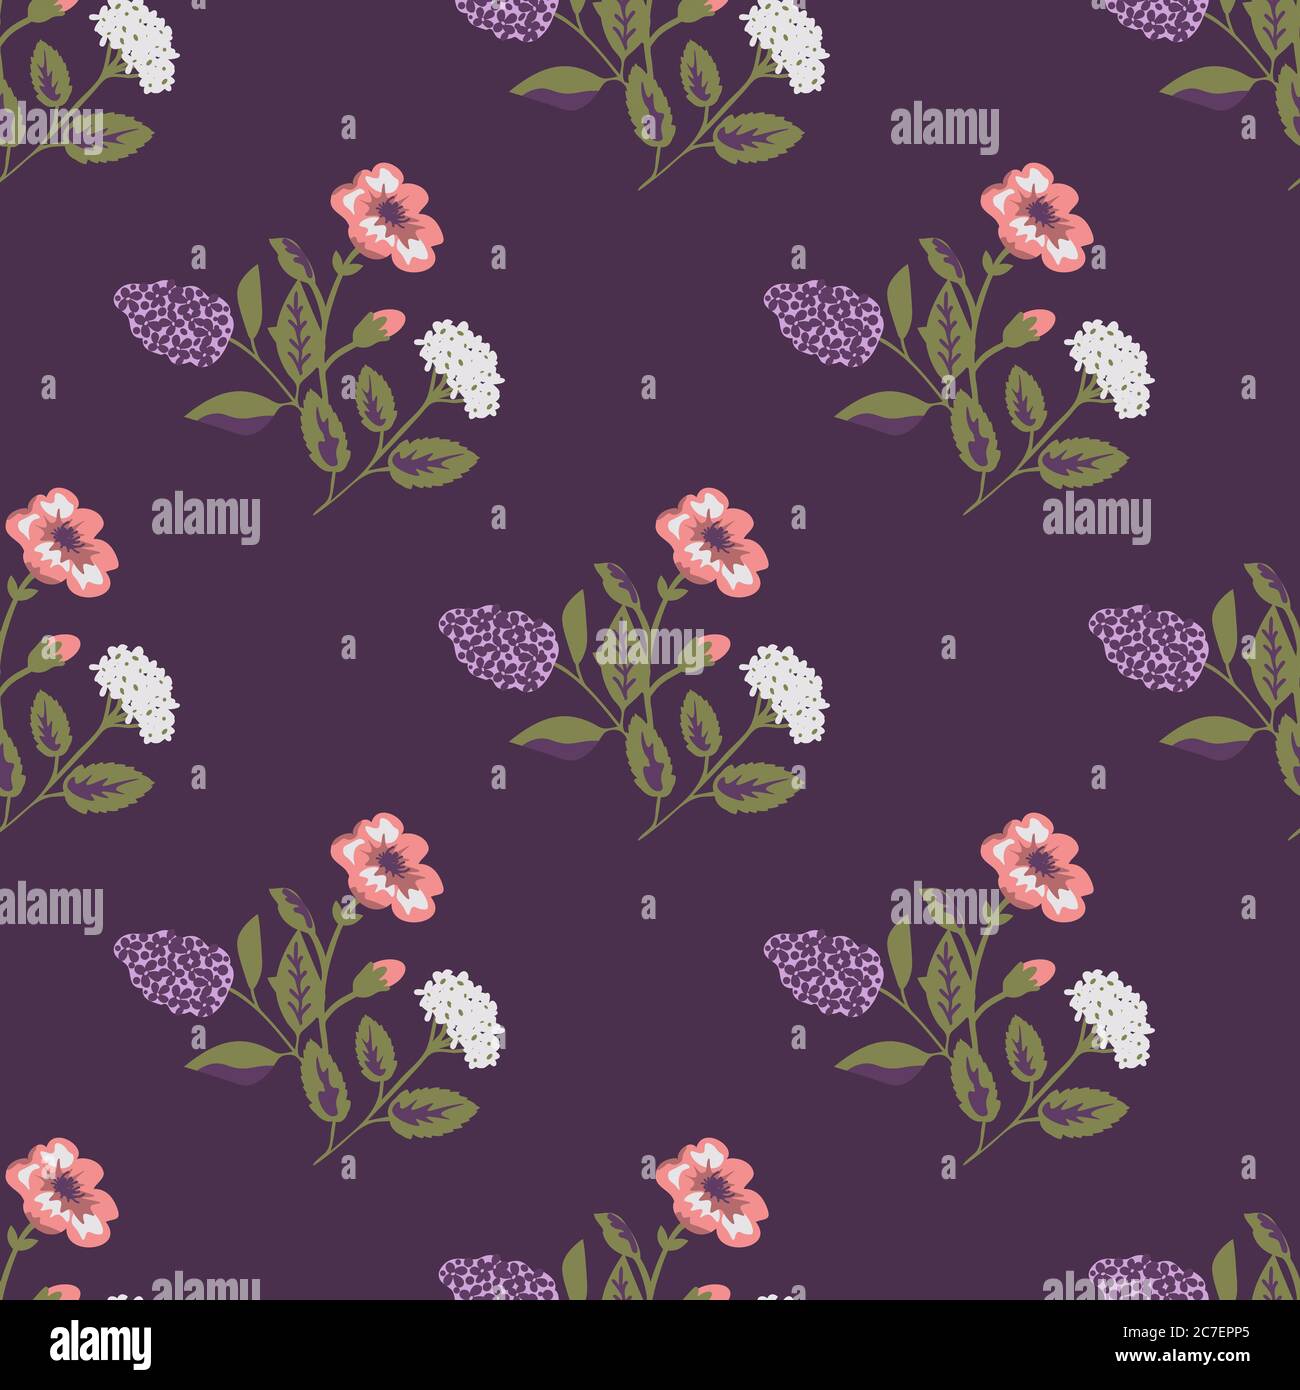 Seamless pattern with decorative flowers Stock Vector